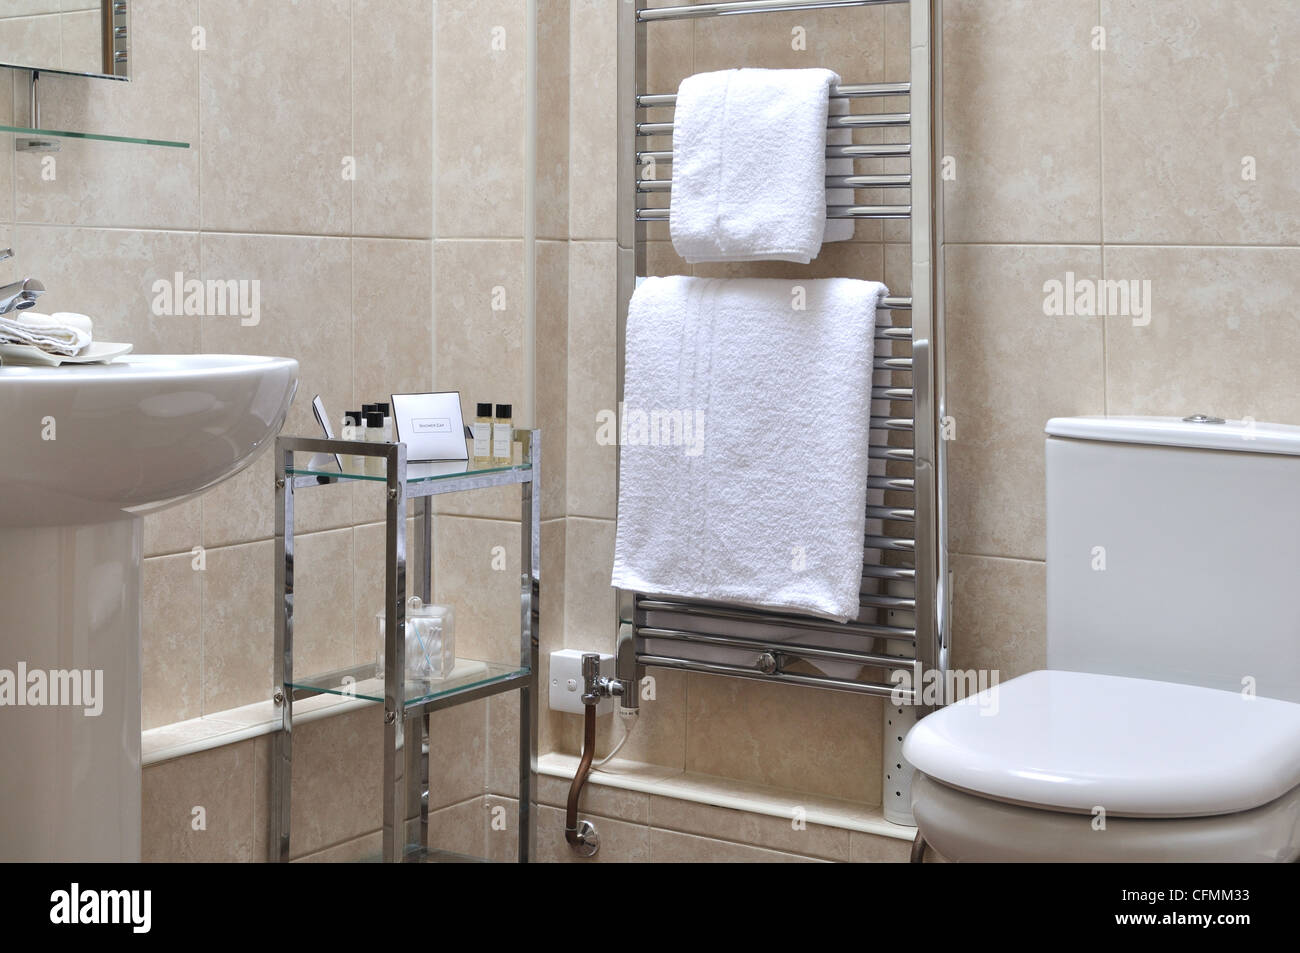 Luxury ensuite bathroom in bed and breakfast accommodation Stock Photo